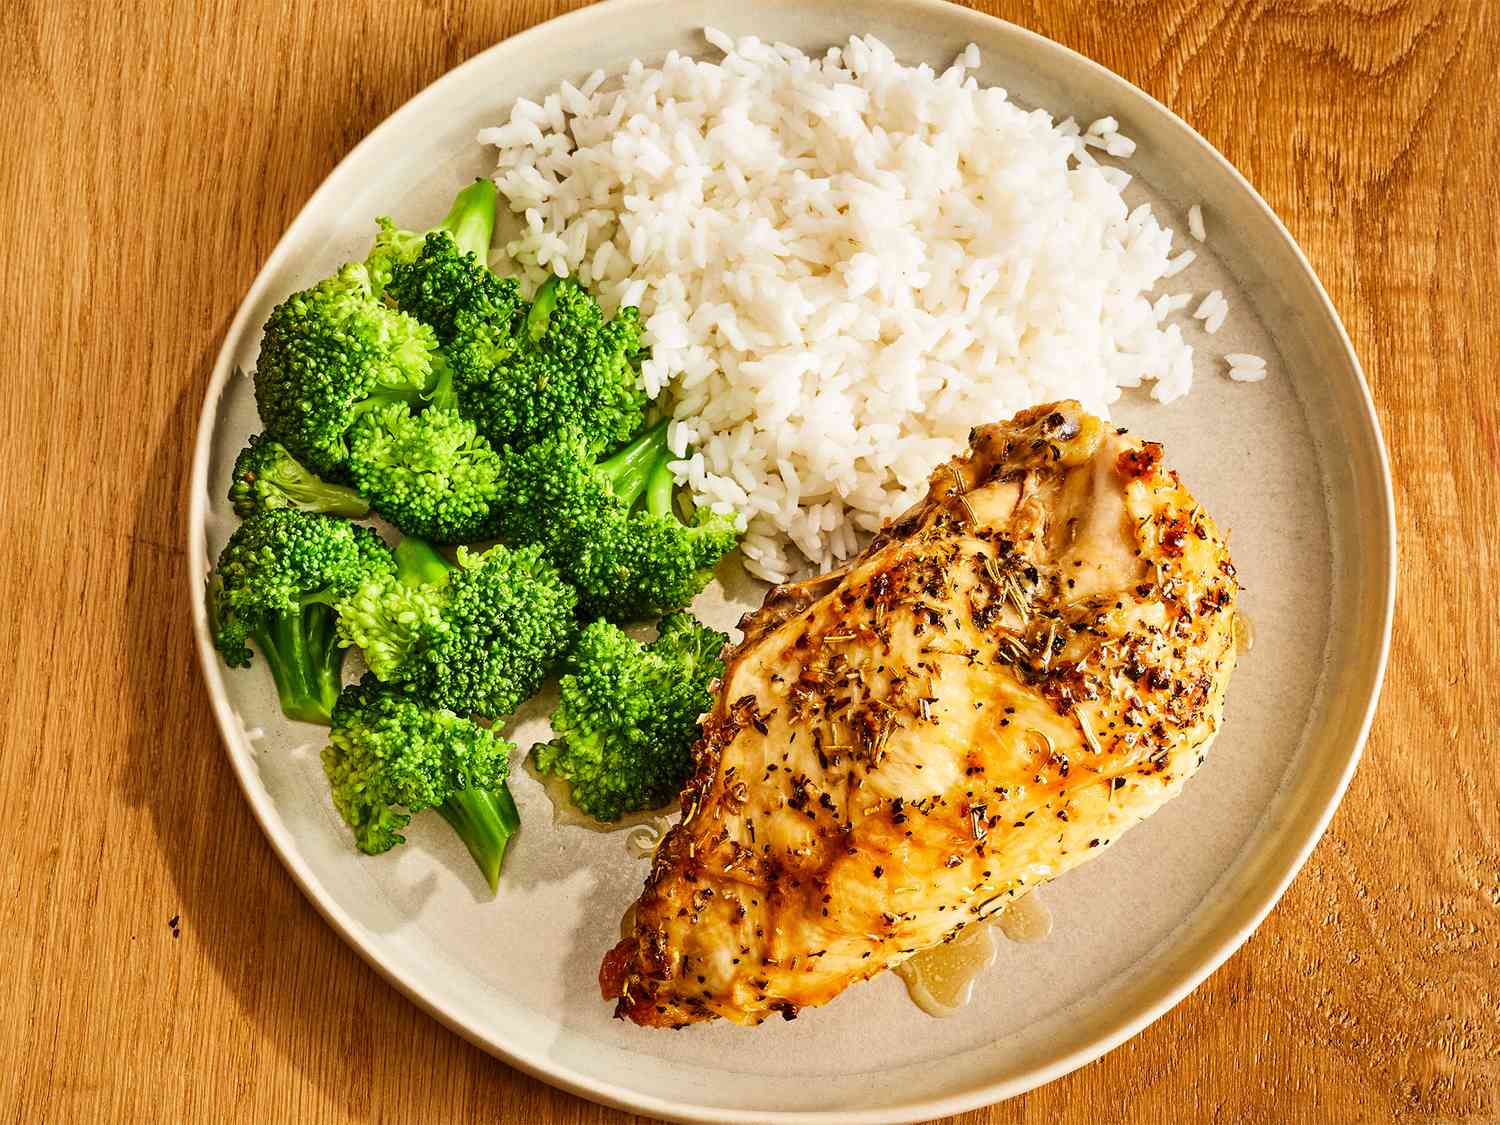 Completed baked split chicken breast with broccoli and rice on the side.